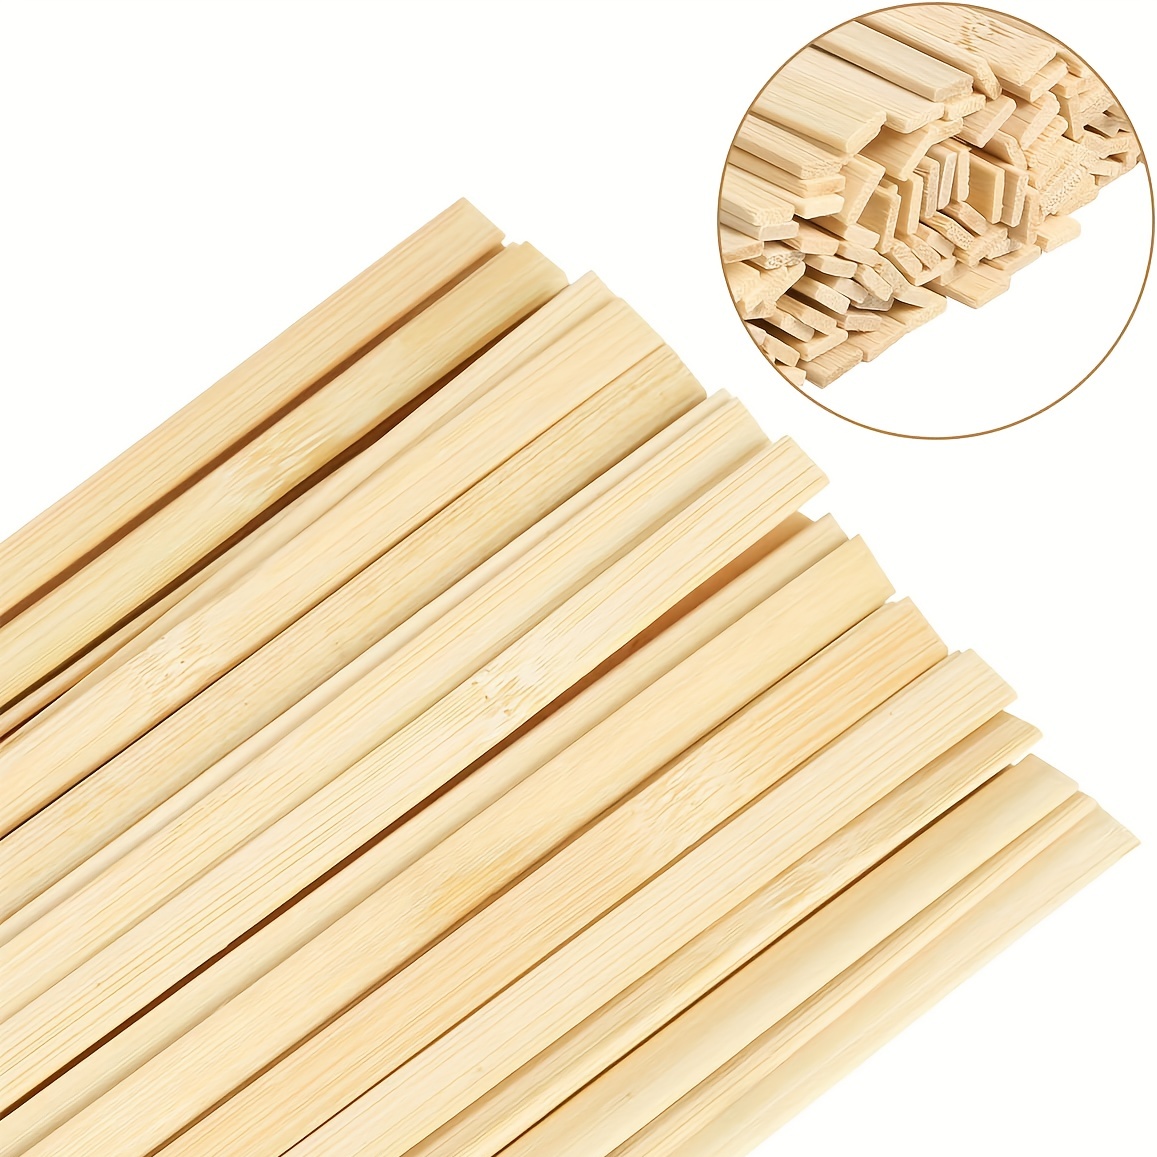 50 Pcs Natural Bamboo Thin Wood Strips 15.5 Inches Long Craft Popsicle  Balsa Sticks DIY Bamboo Plank for House Aircraft Ship Boat School Projects  Trim